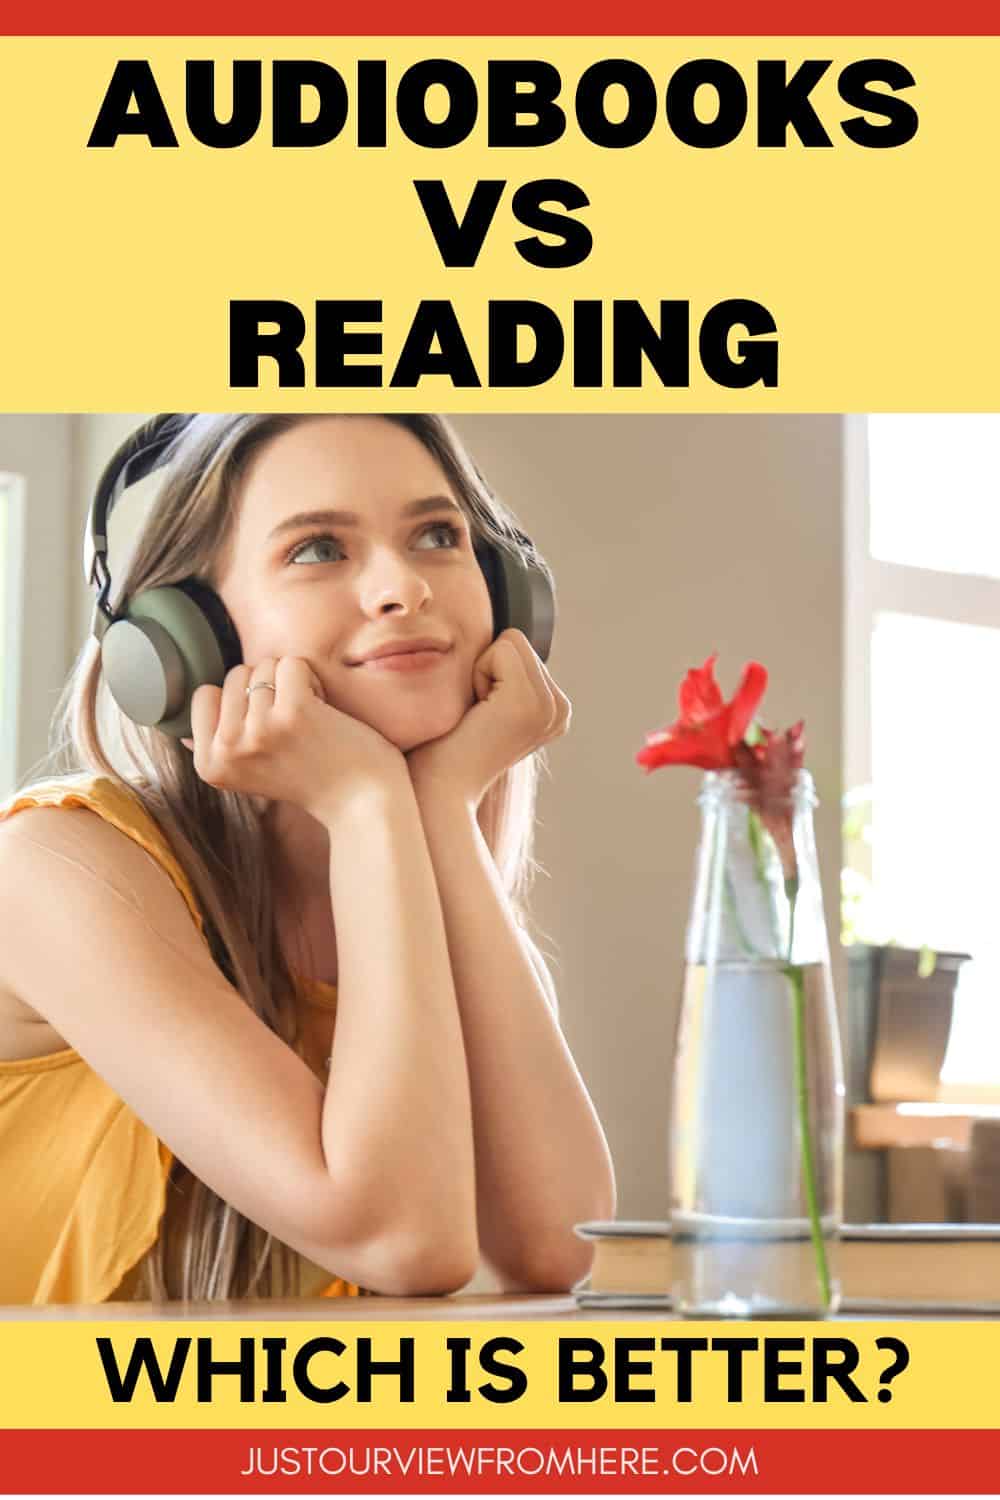 YOUNG GIRL LISTENING TO HEADPHONES WITH BOOK ON HER DESK, TEXT OVERLAY AUDIOBOOKS VS READING WHICH IS BETTER